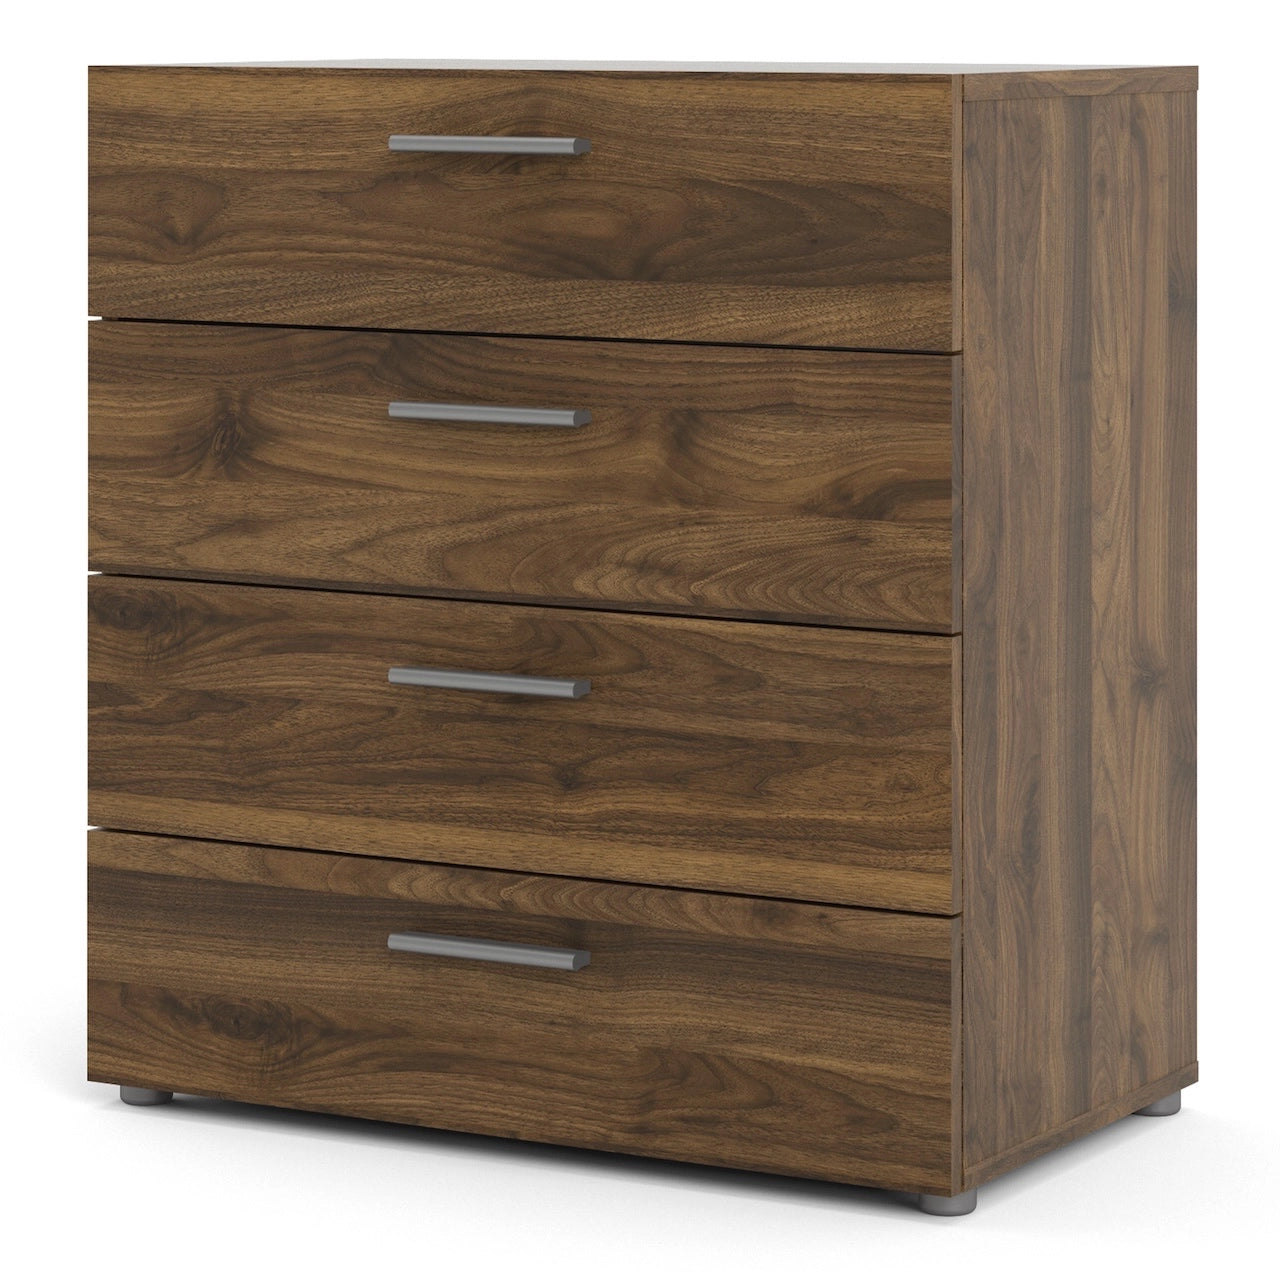 Furniture To Go Pepe Chest of 4 Drawers in Walnut